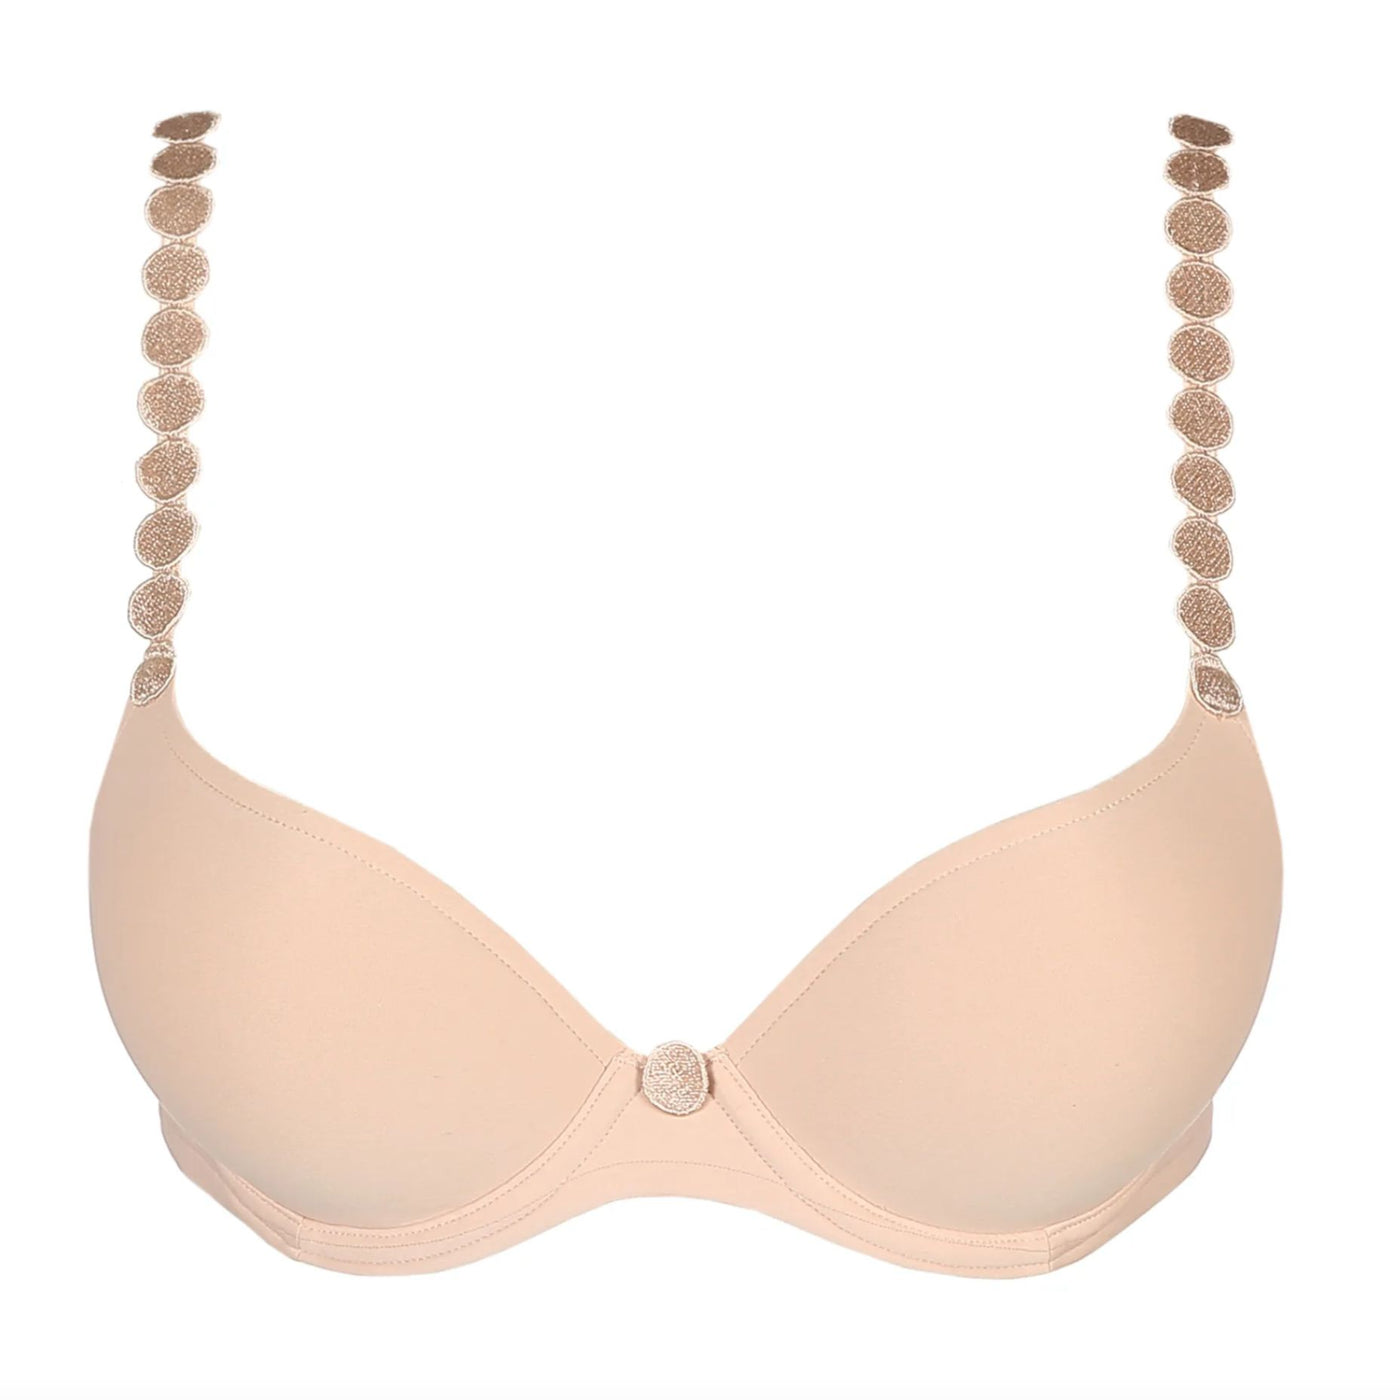 Marie Jo Tom Push Up Bra in Cafe au Lait 0220827-Bras-Marie Jo-Cafe au Lait-32-B-Anna Bella Fine Lingerie, Reveal Your Most Gorgeous Self!